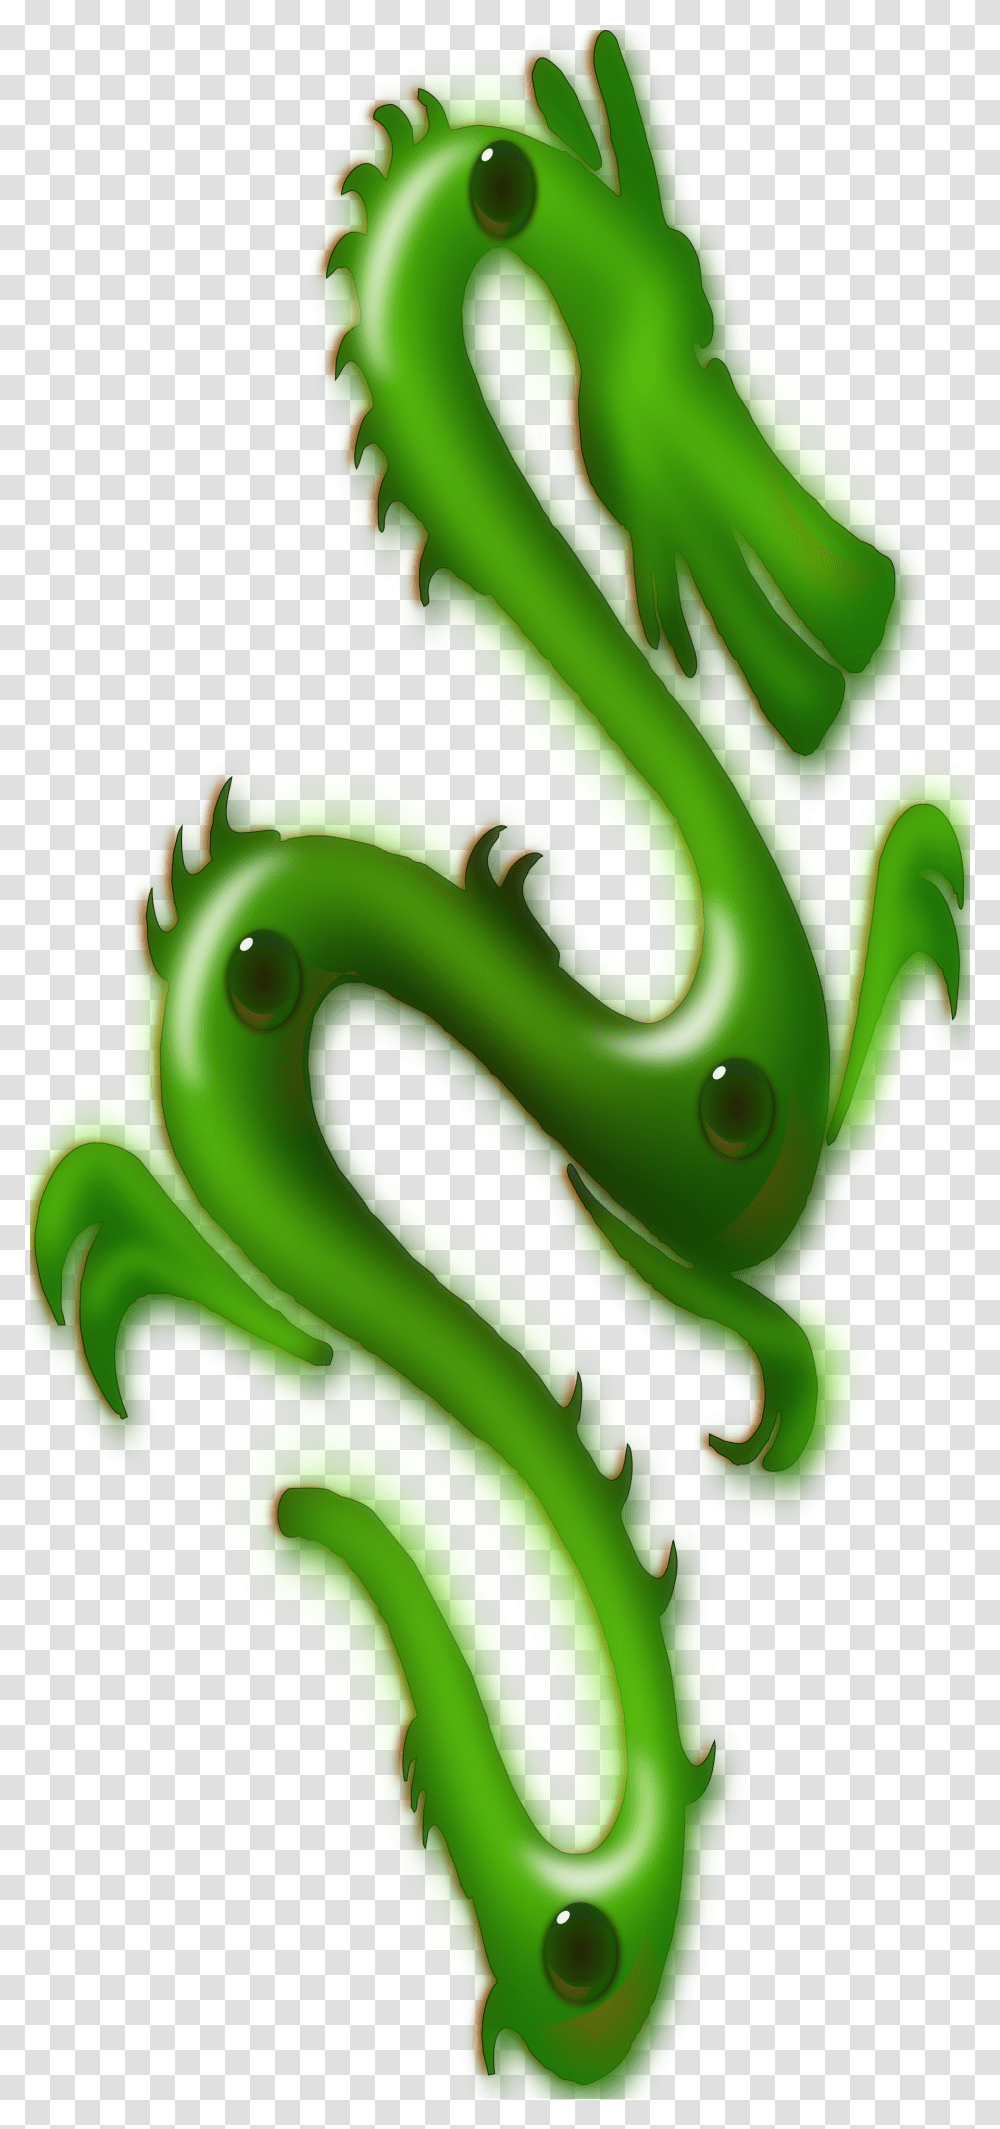 Net Clip Art Chinese New Year Chinese Jade, Dragon, Green, Toy, Reptile Transparent Png